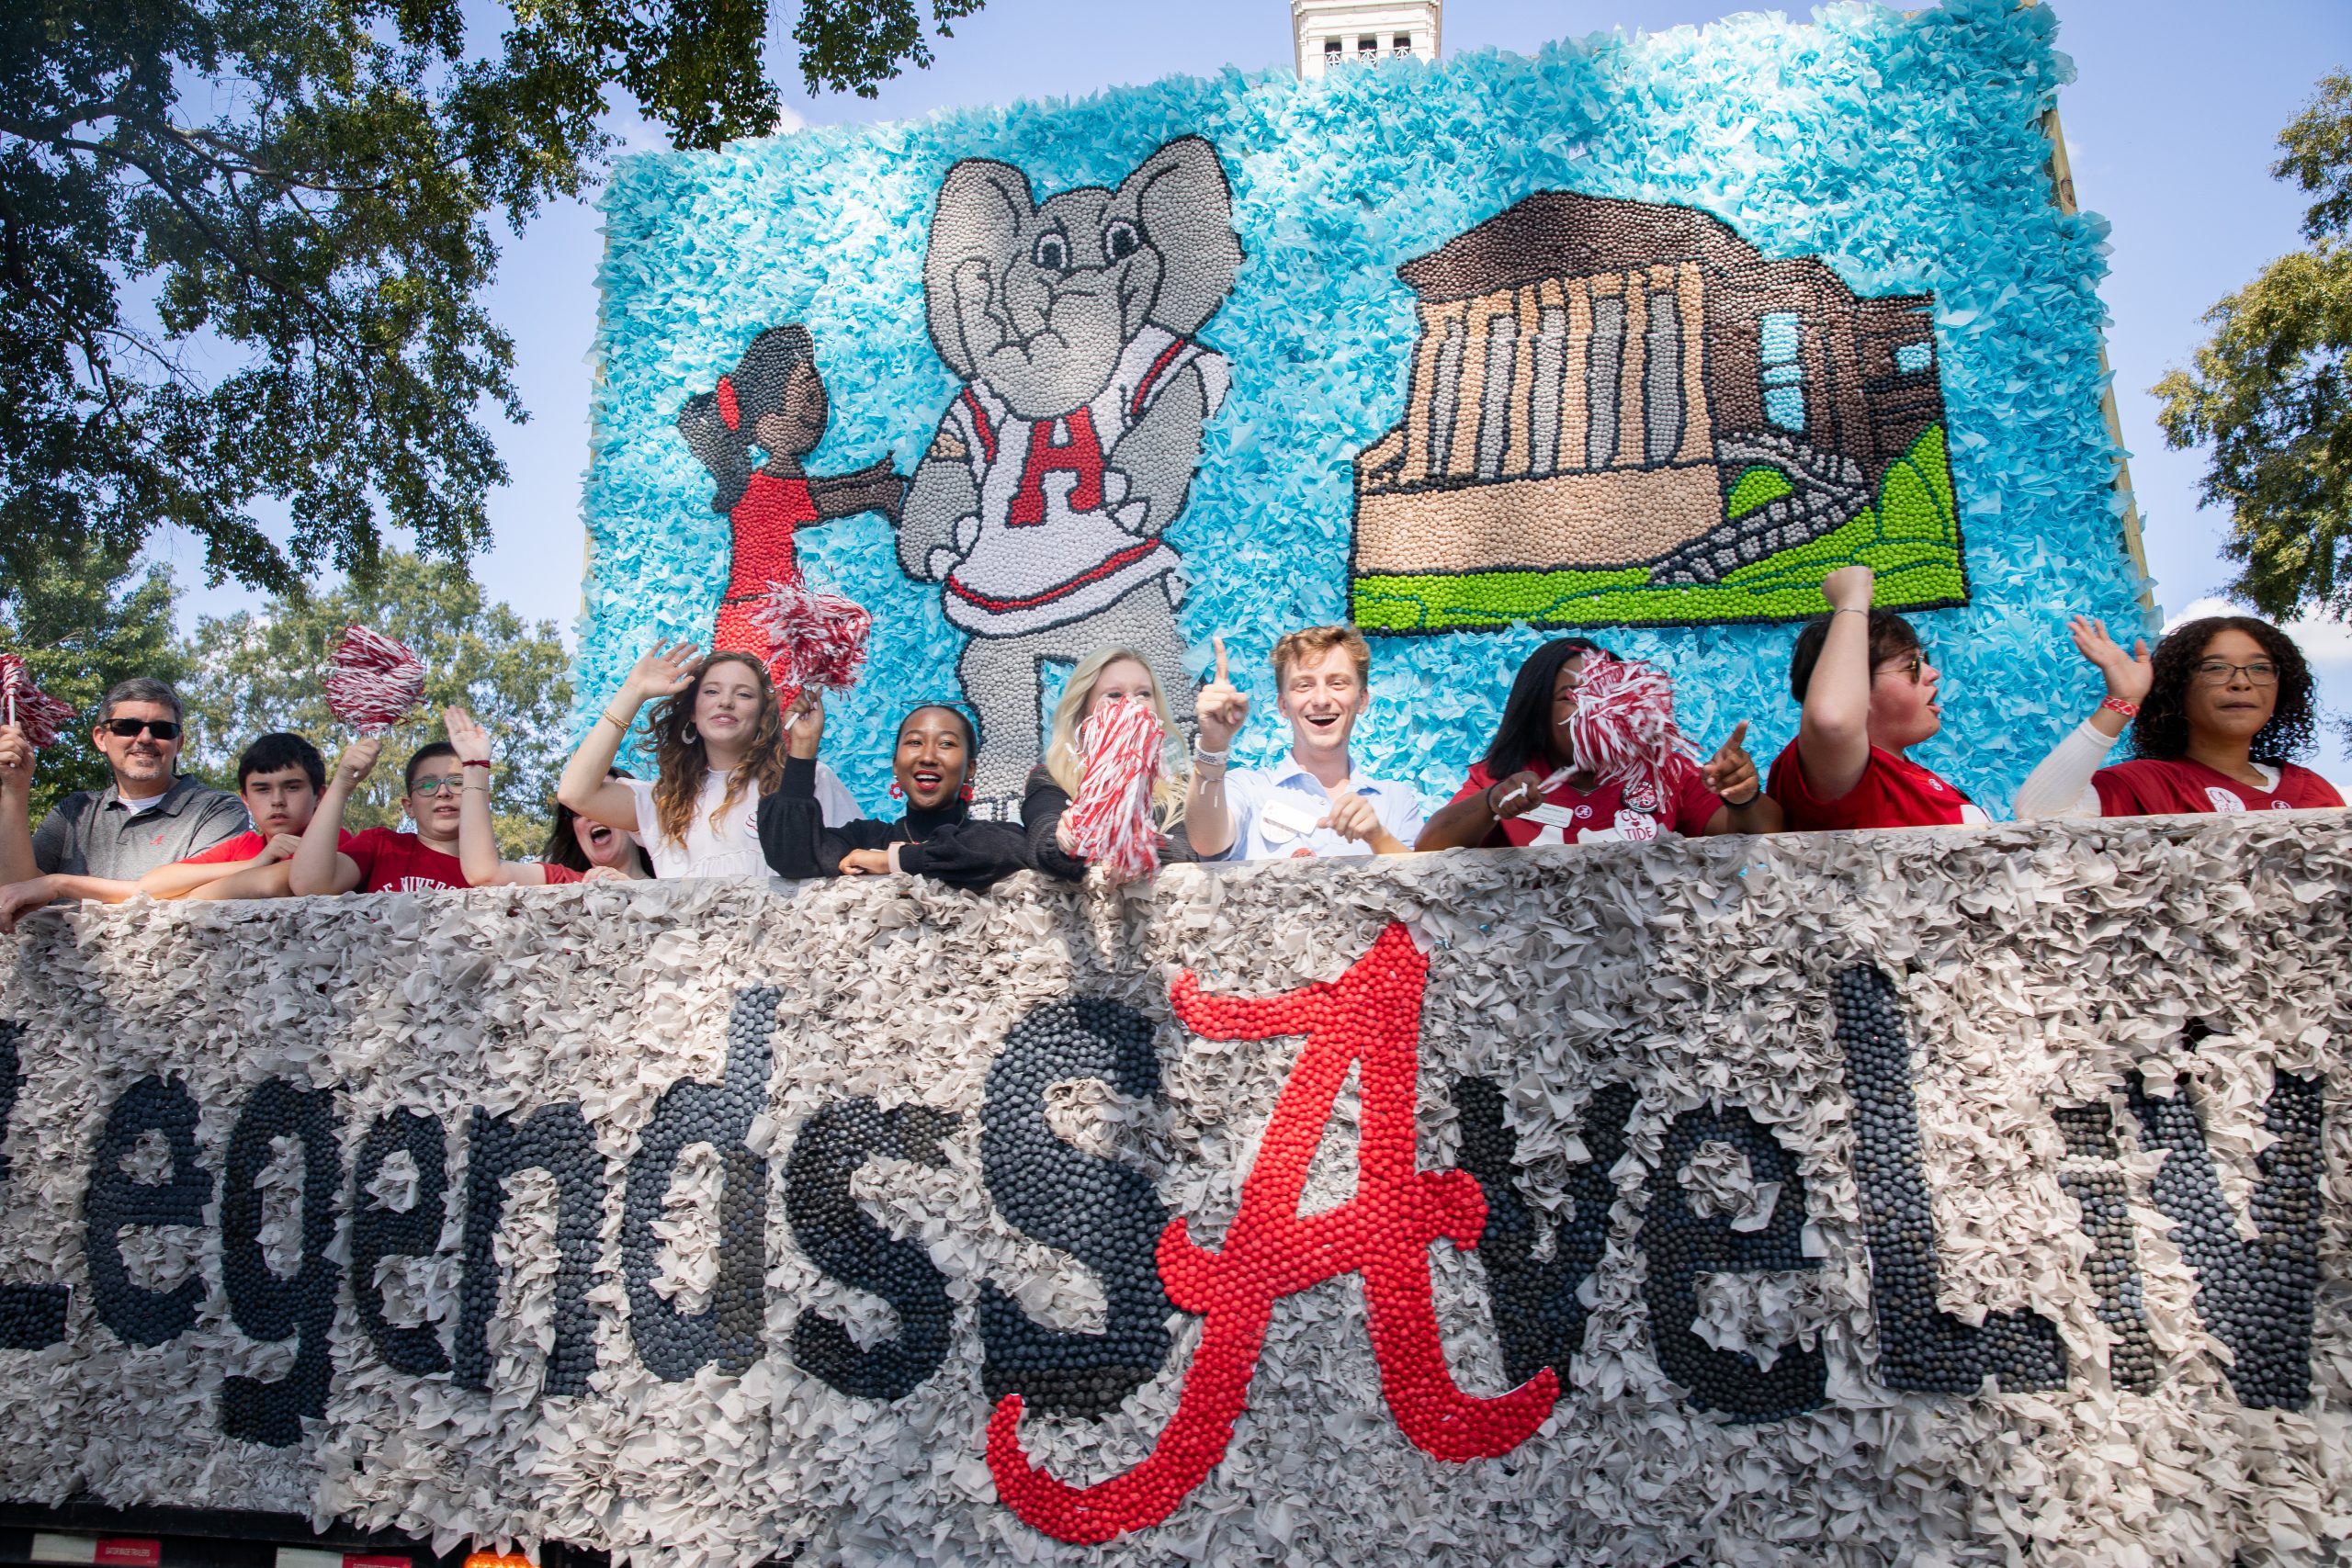 students dressed in Alabama garb cheering from Homecoming float